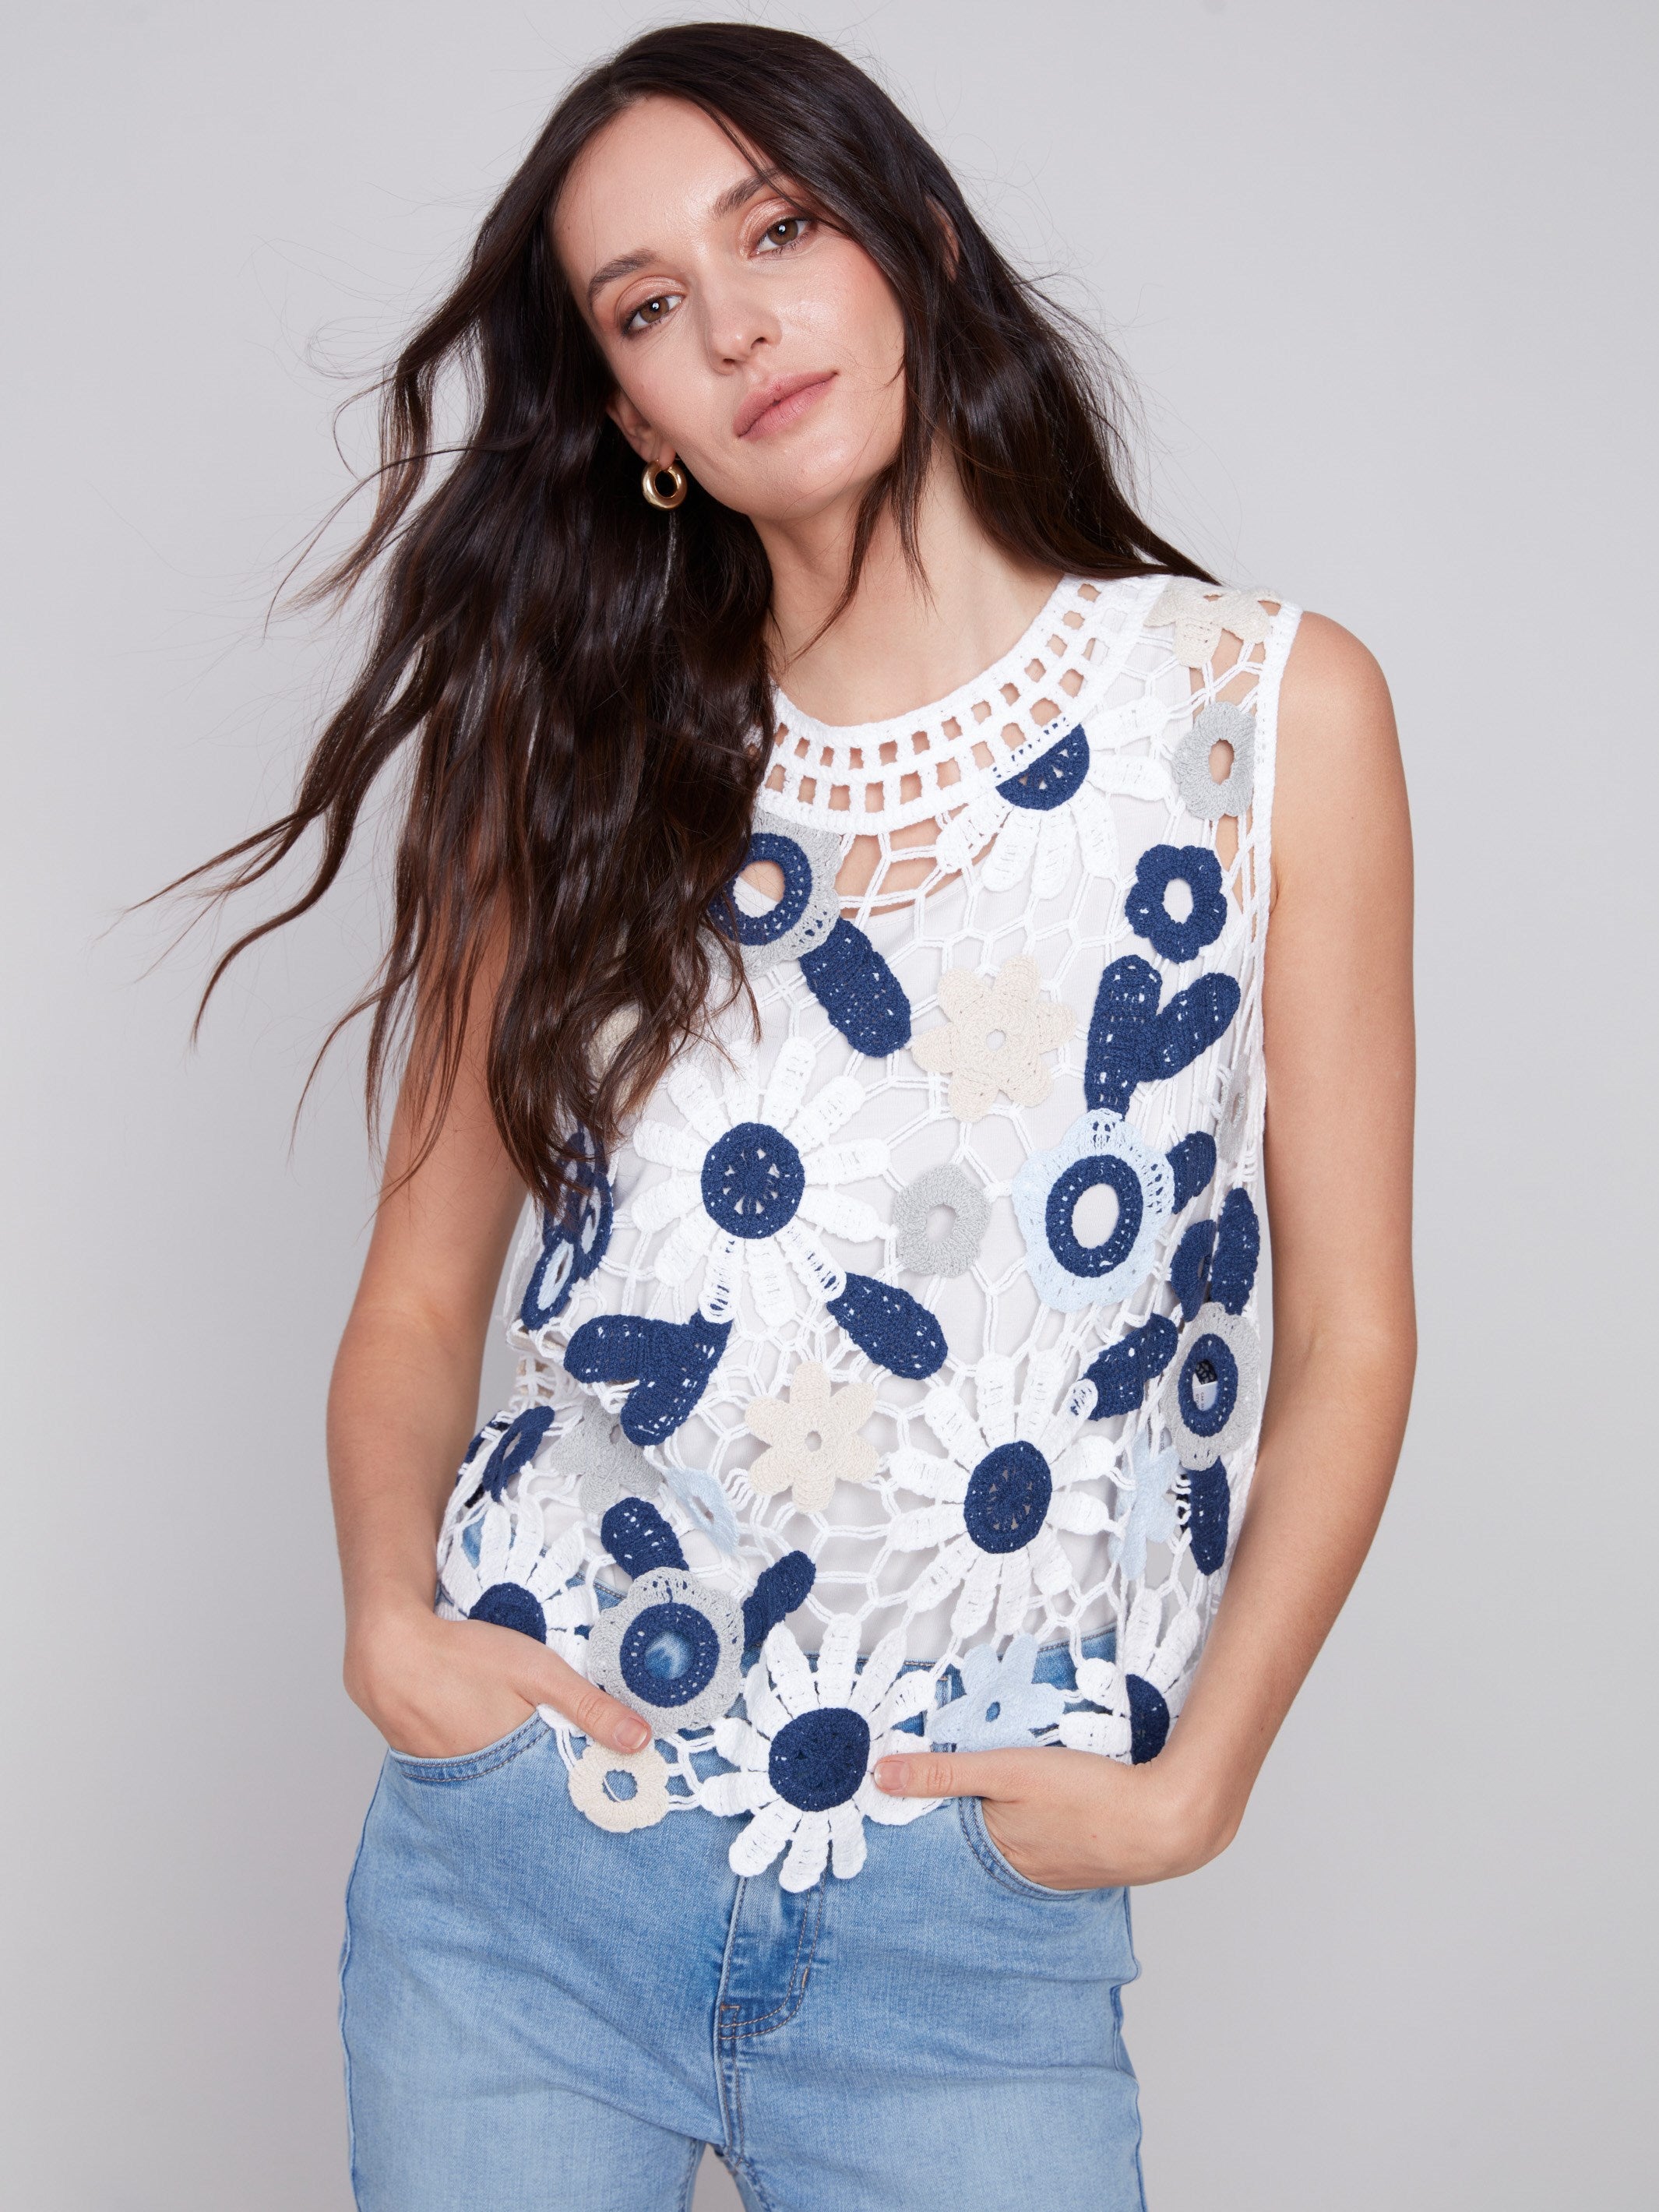 Sleeveless Crochet Top With Floral Pattern - Celadon - Charlie B Collection Canada - Image 5